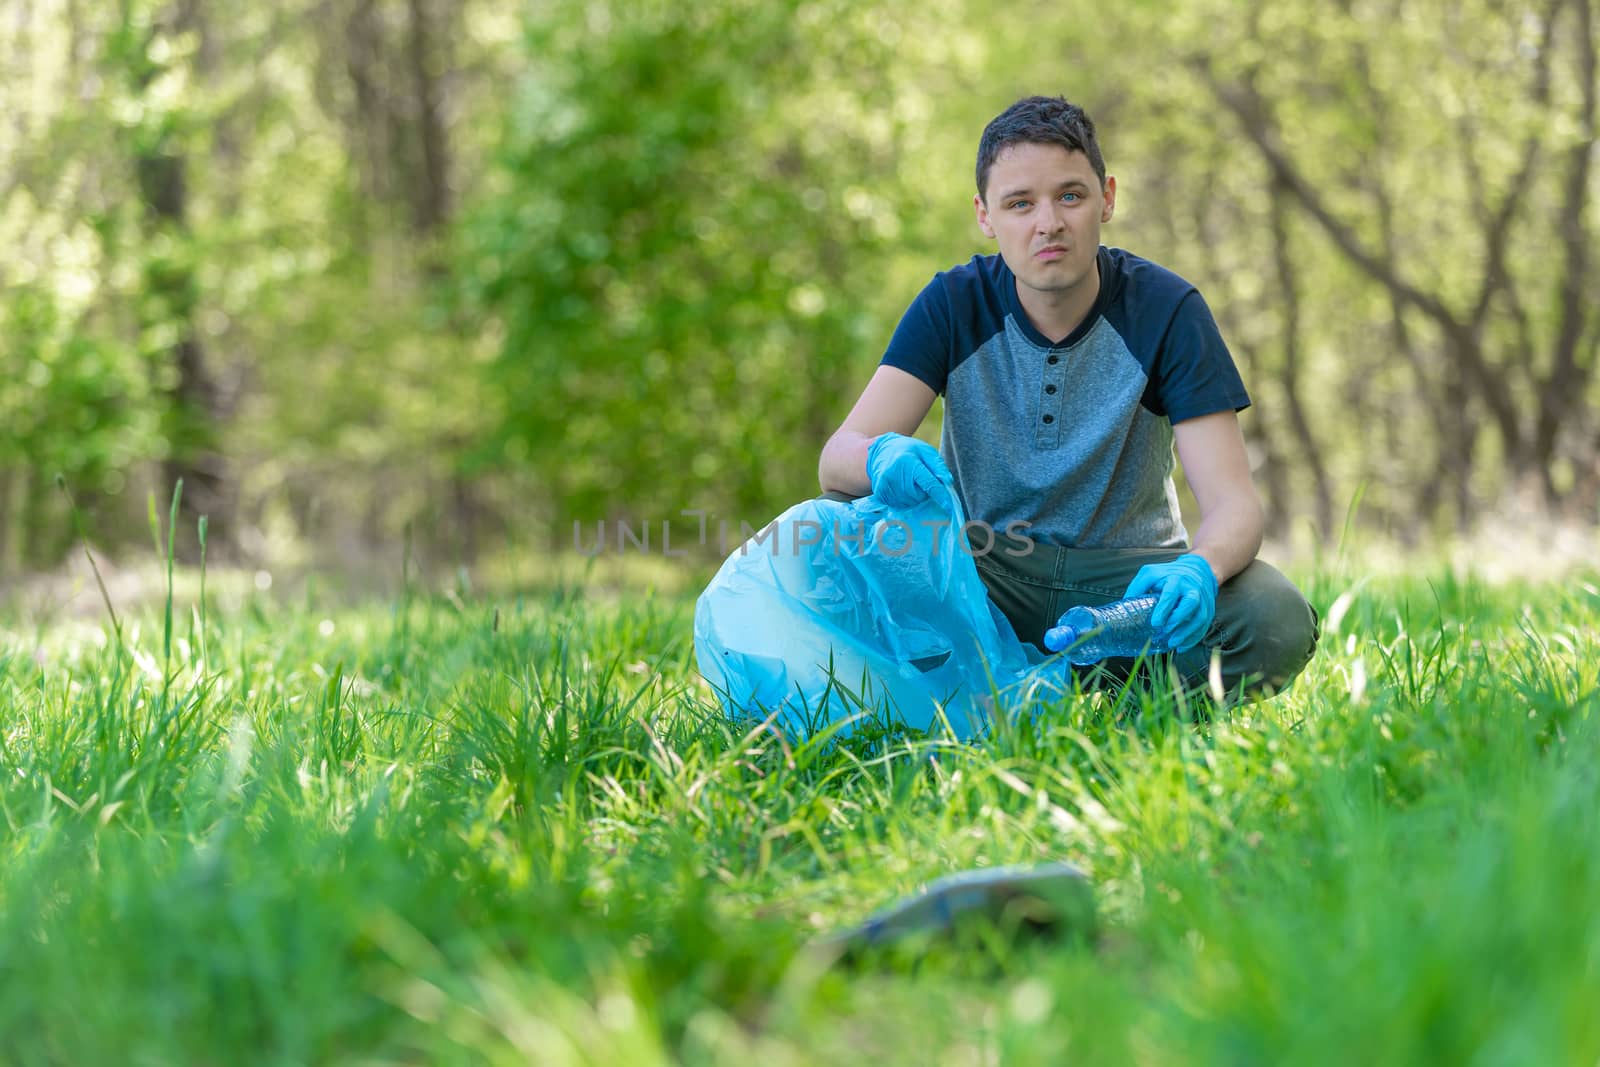 The volunteer cleans the forest from garbage, protects the environment by Edophoto